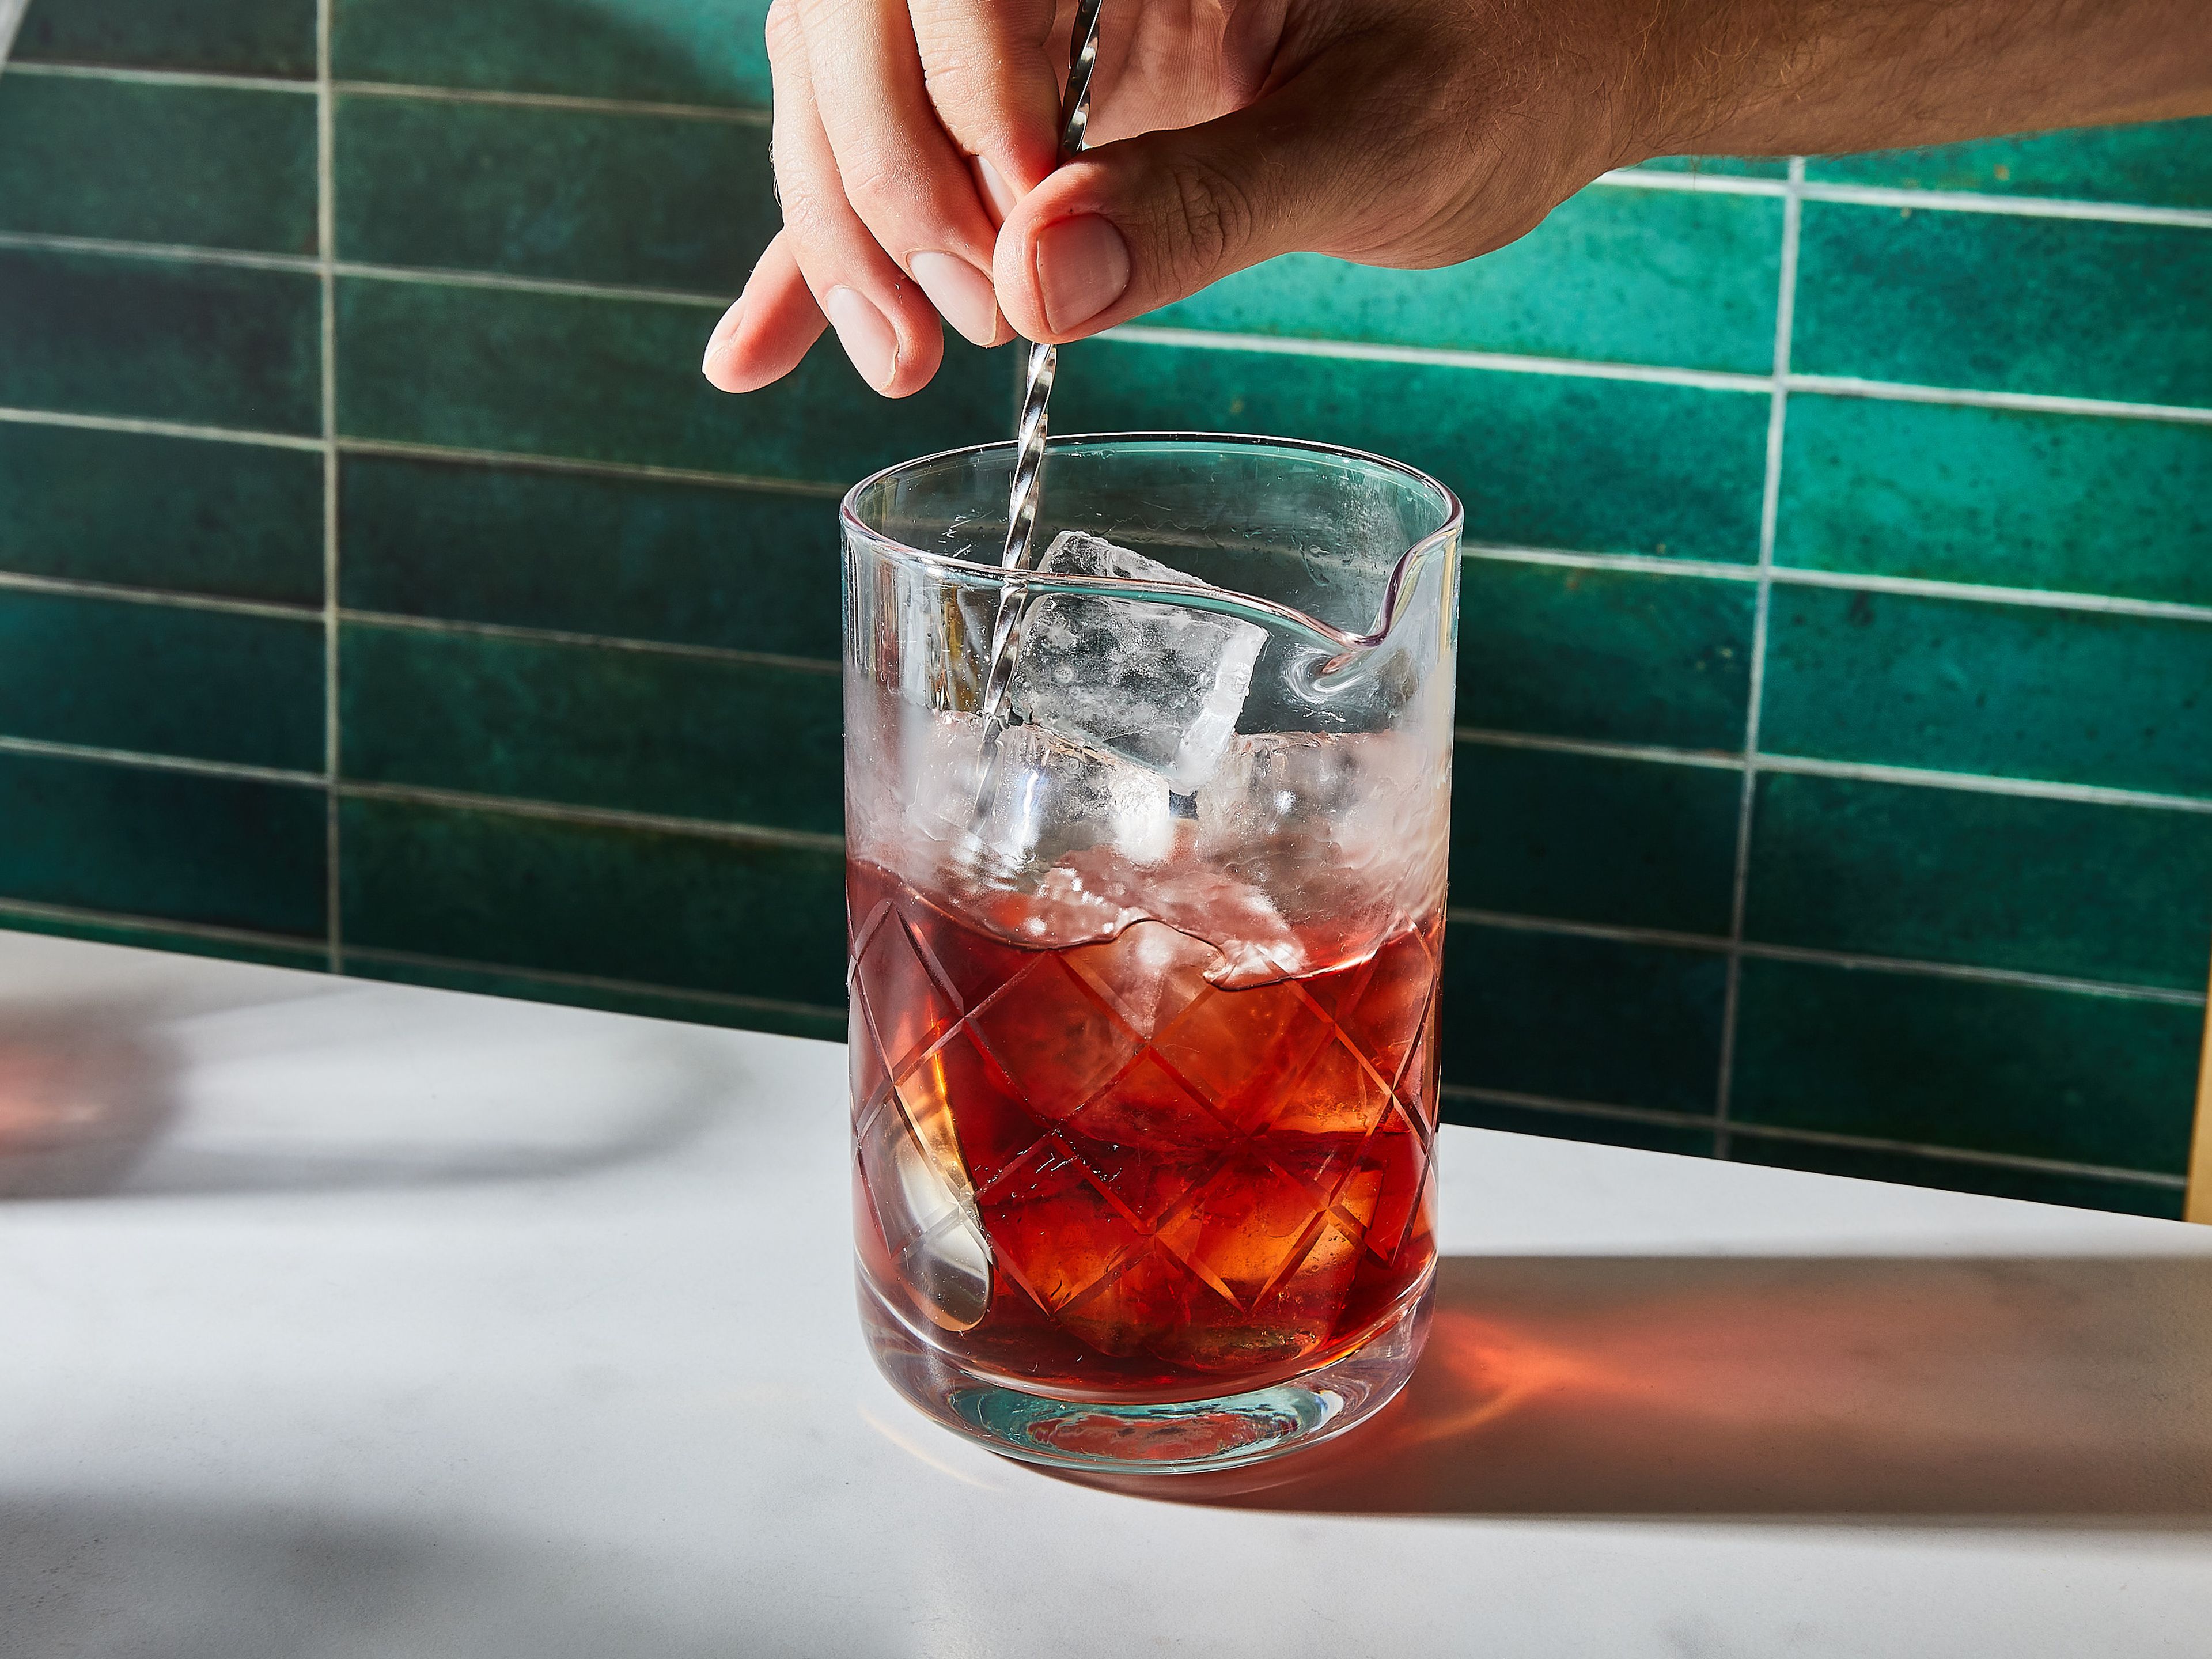 Pour Campari, vermouth and gin into a measuring cup or mixing glass with (small) ice cubes and stir well.